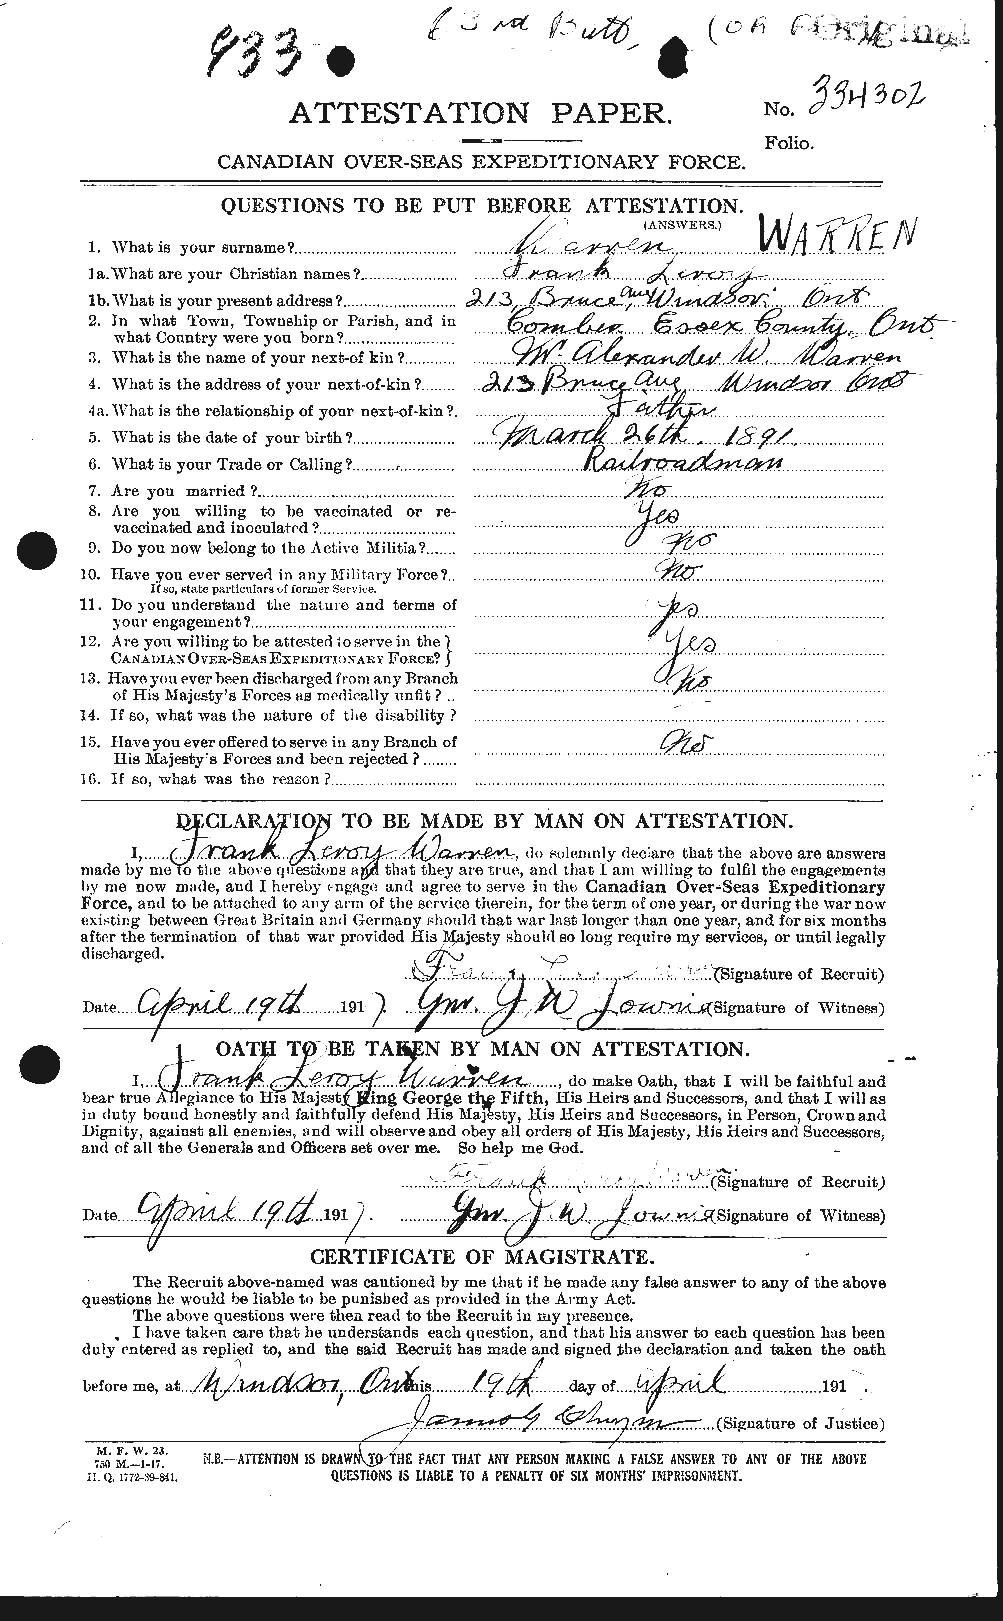 Personnel Records of the First World War - CEF 658433a